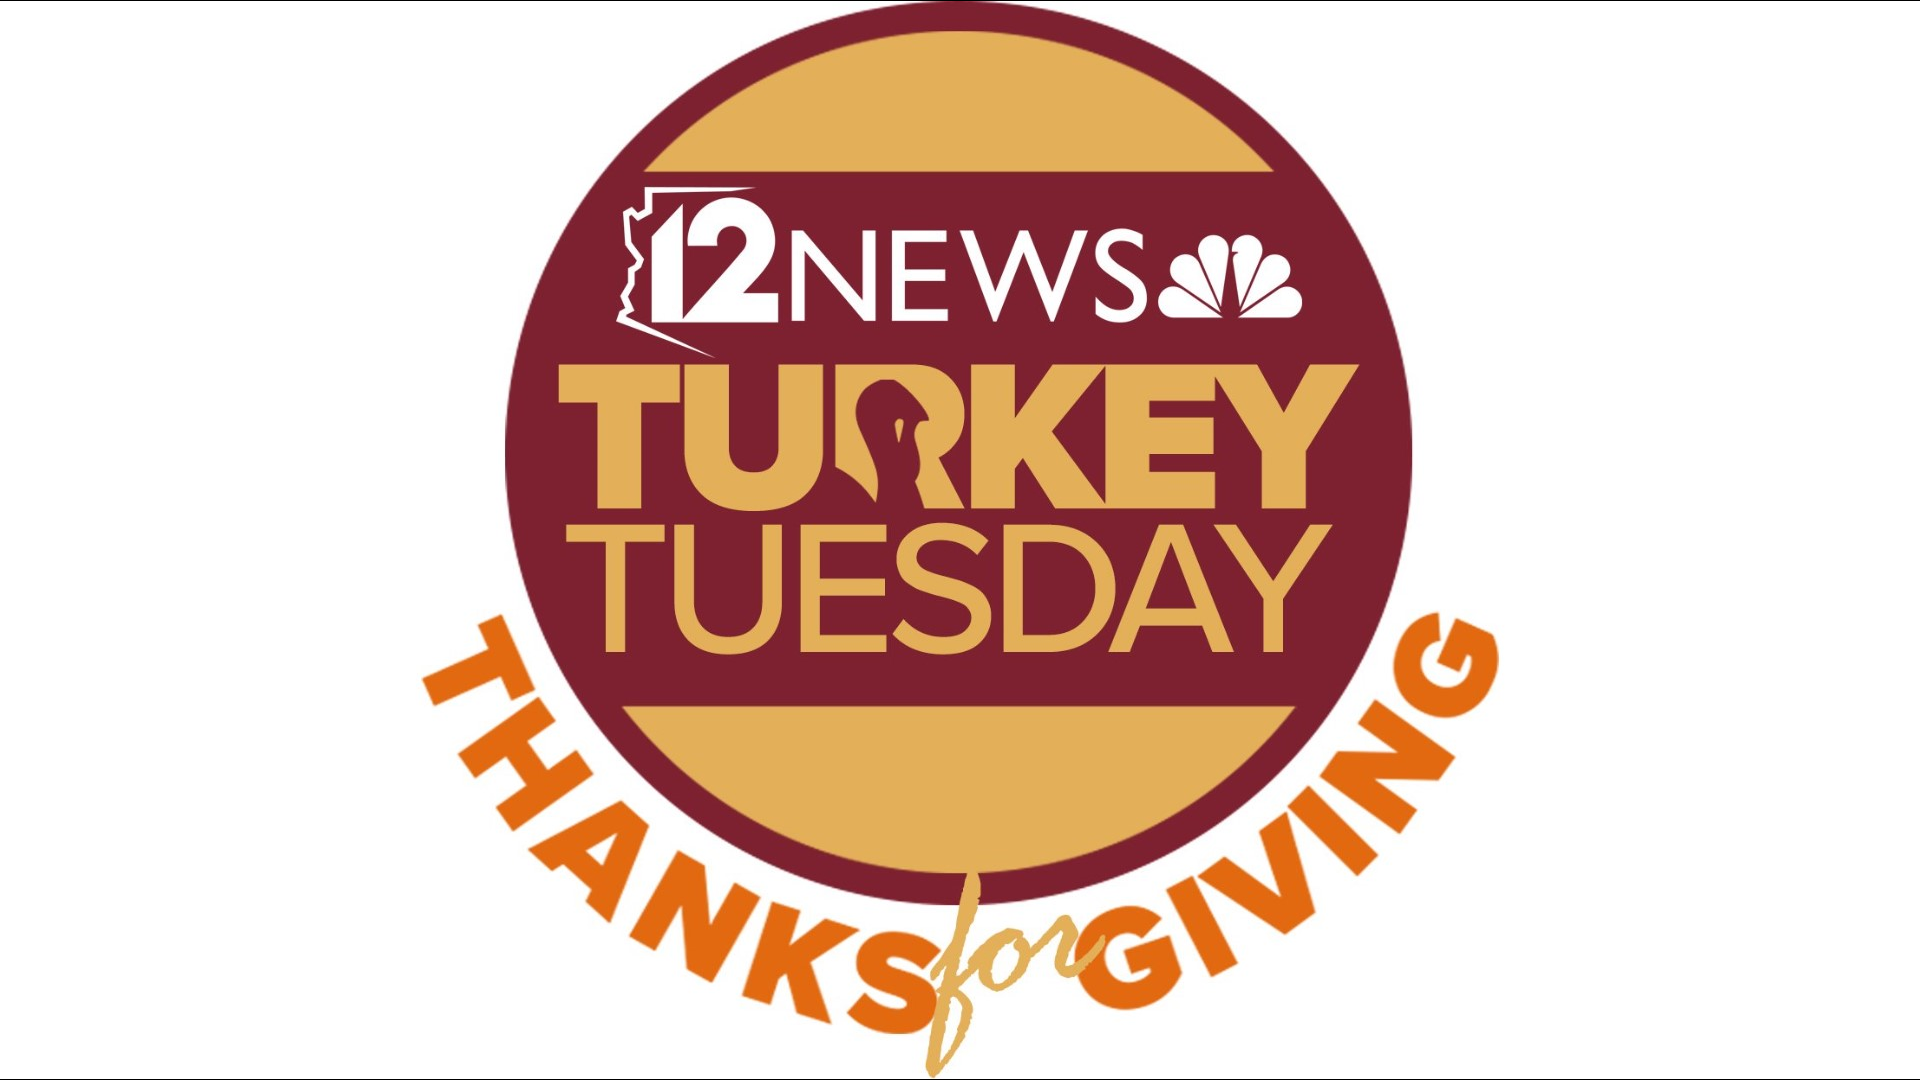 12 News and St. Vincent de Paul are teaming up with Bashas', Food City and AJ's to help feed hungry Arizona families this Thanksgiving!